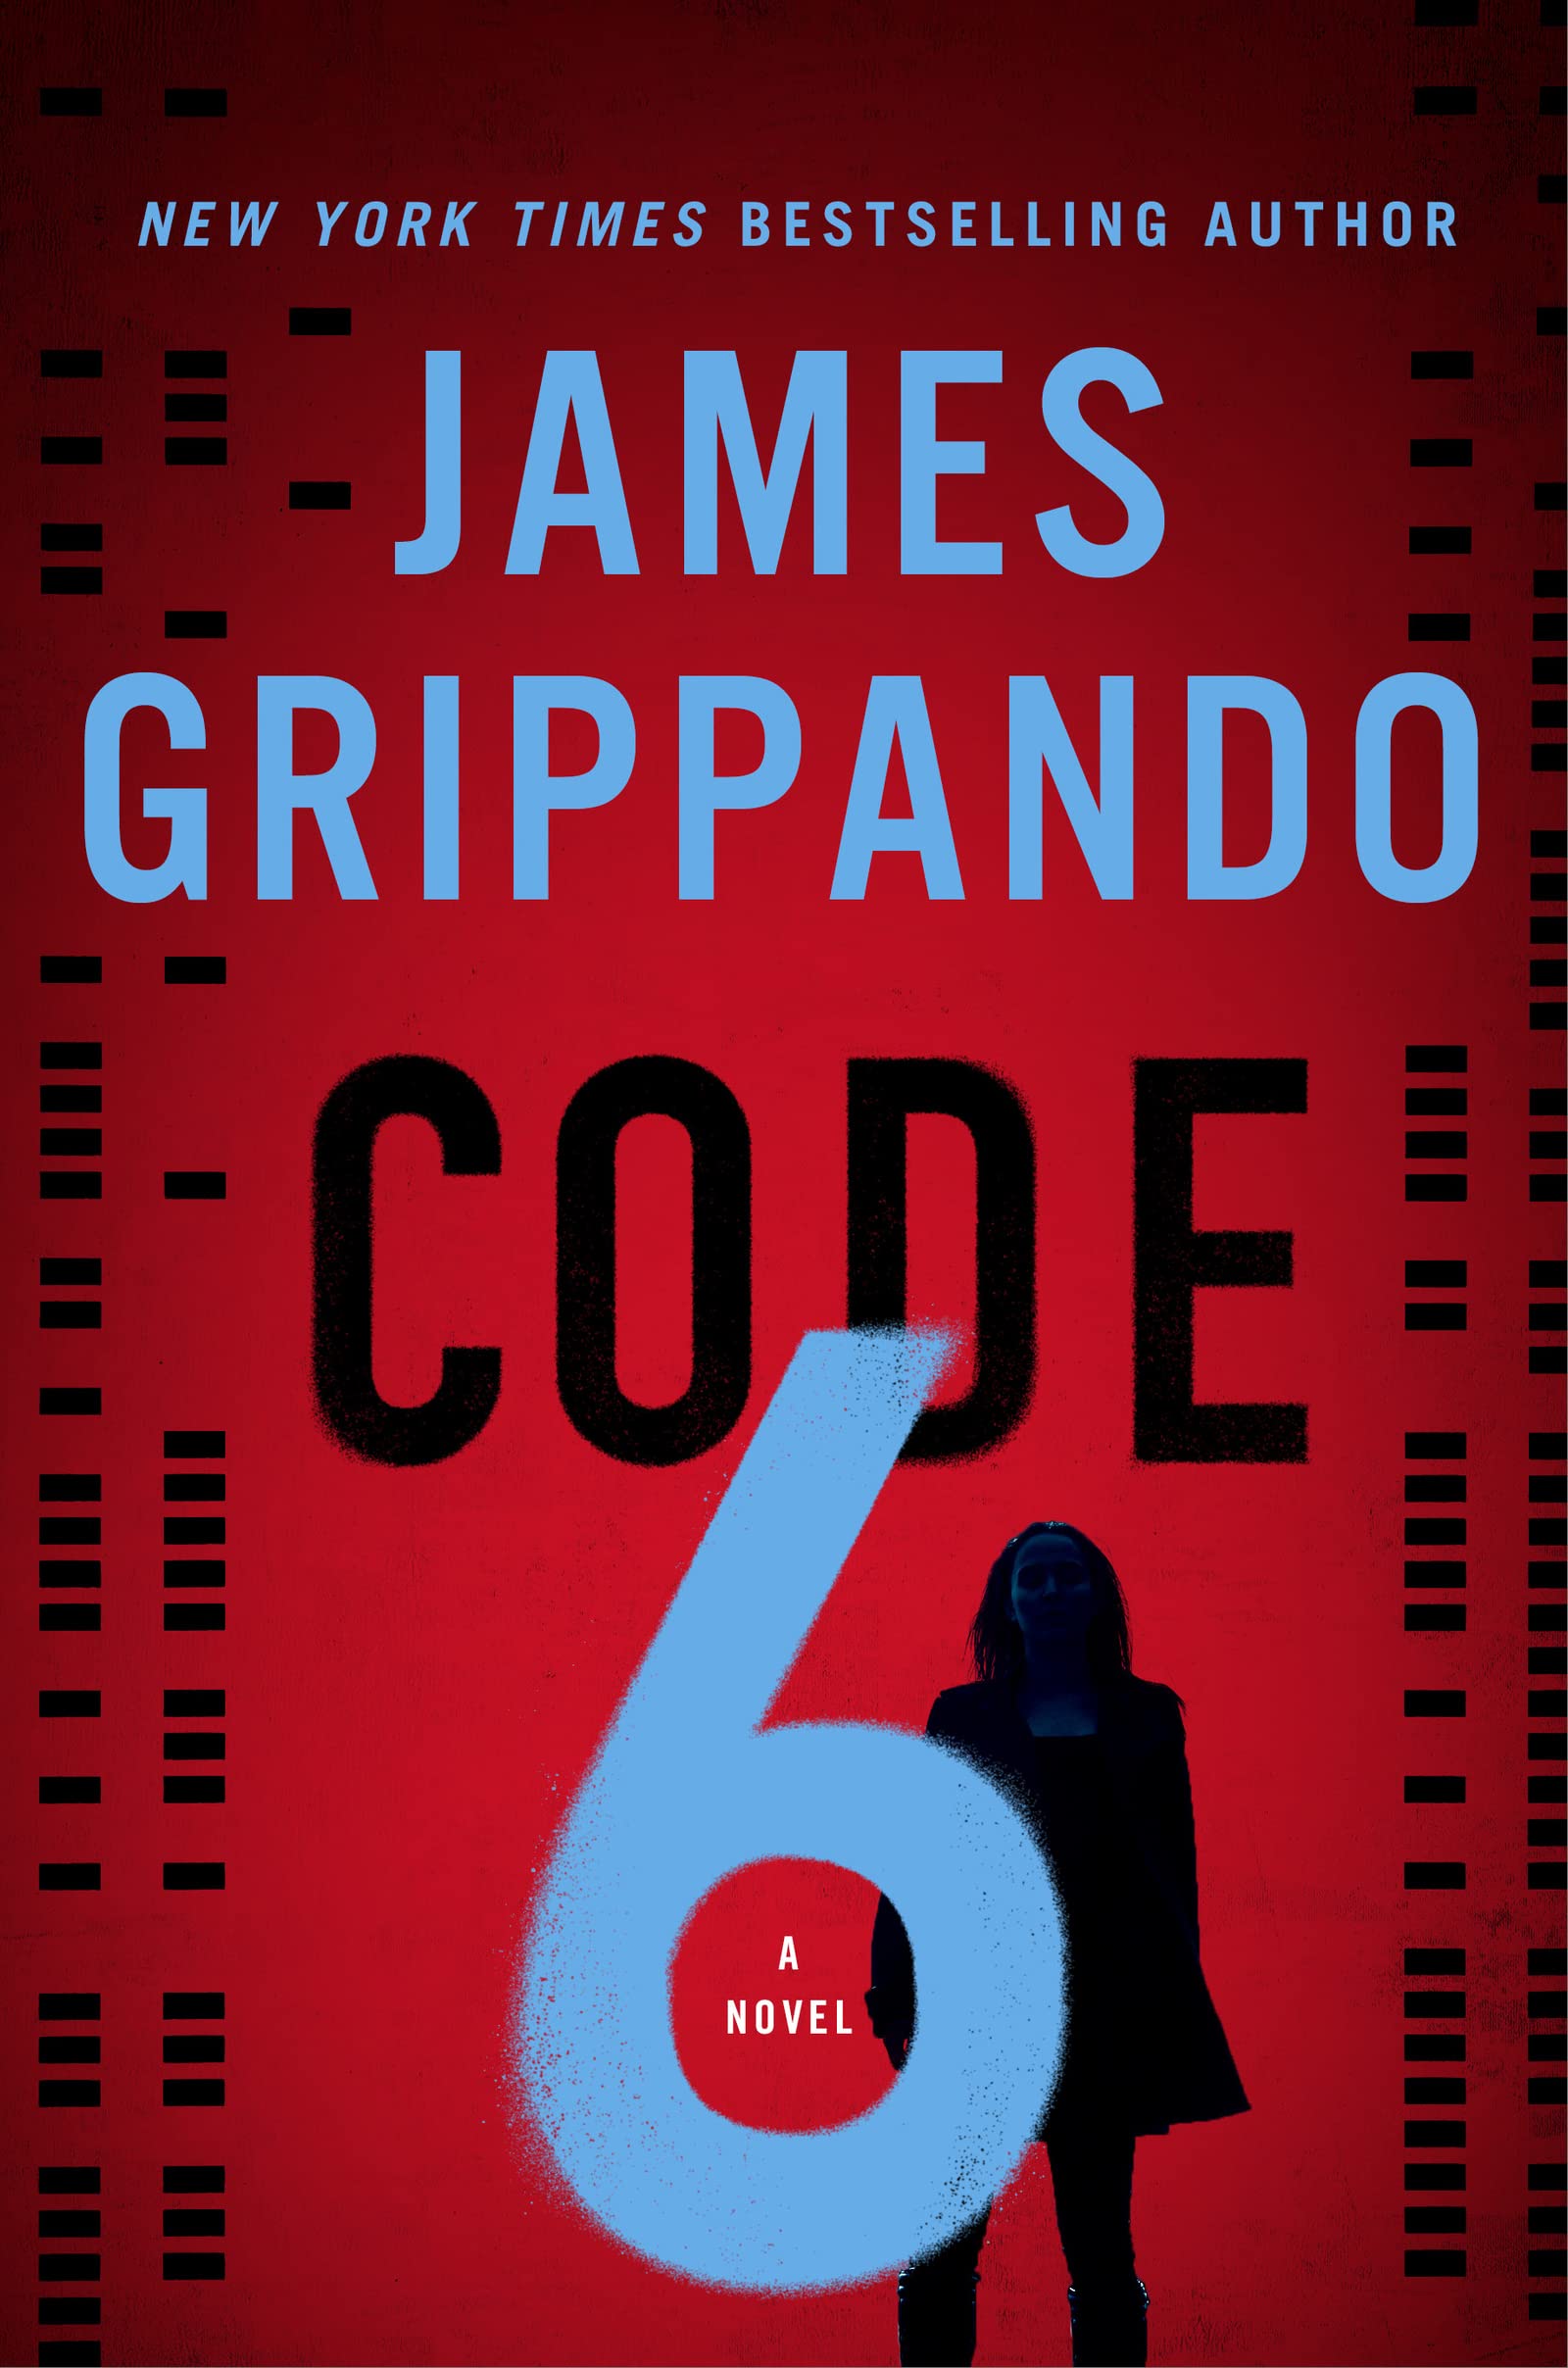 Image for "Code 6"